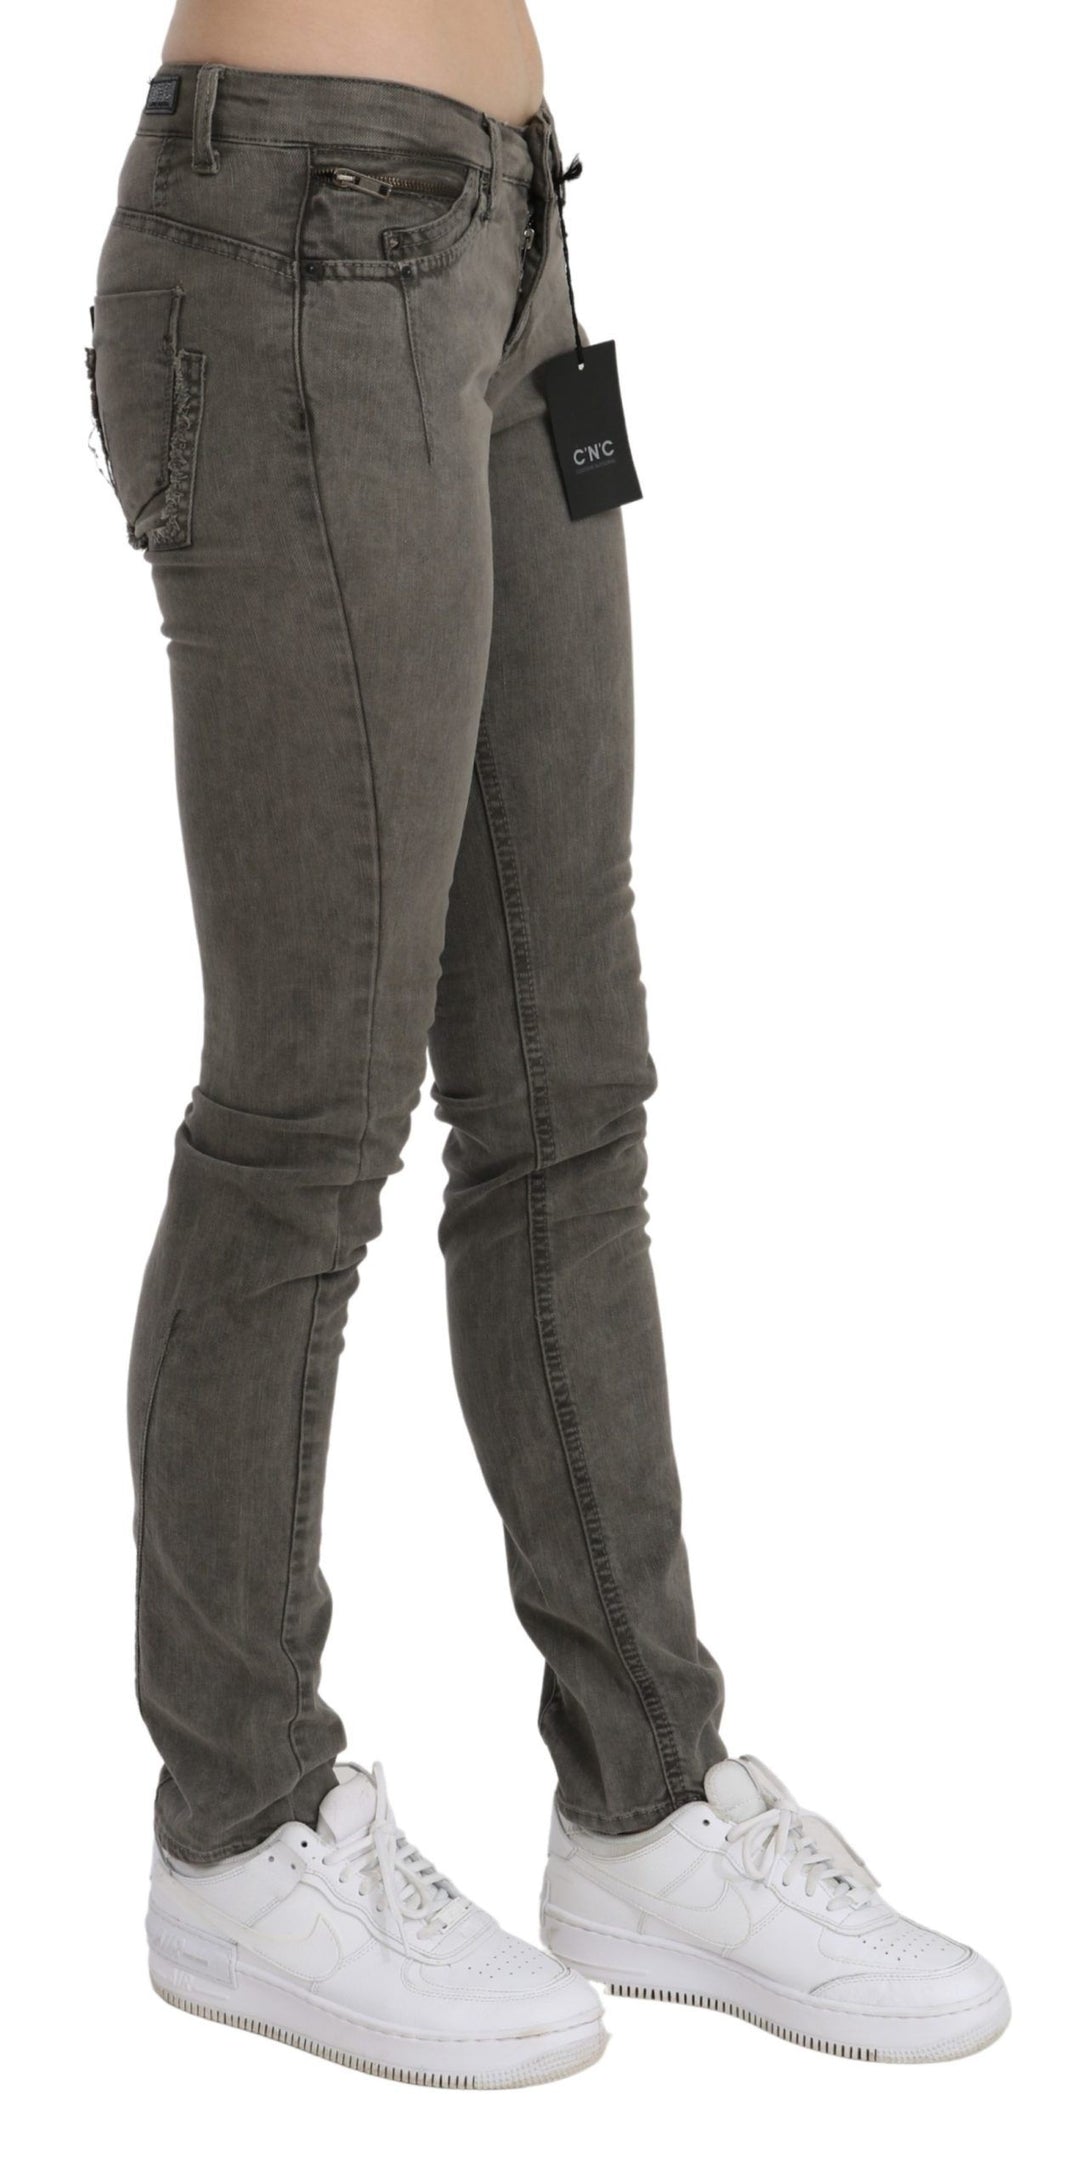 Costume National Chic Gray Slim Fit Cotton Jeans